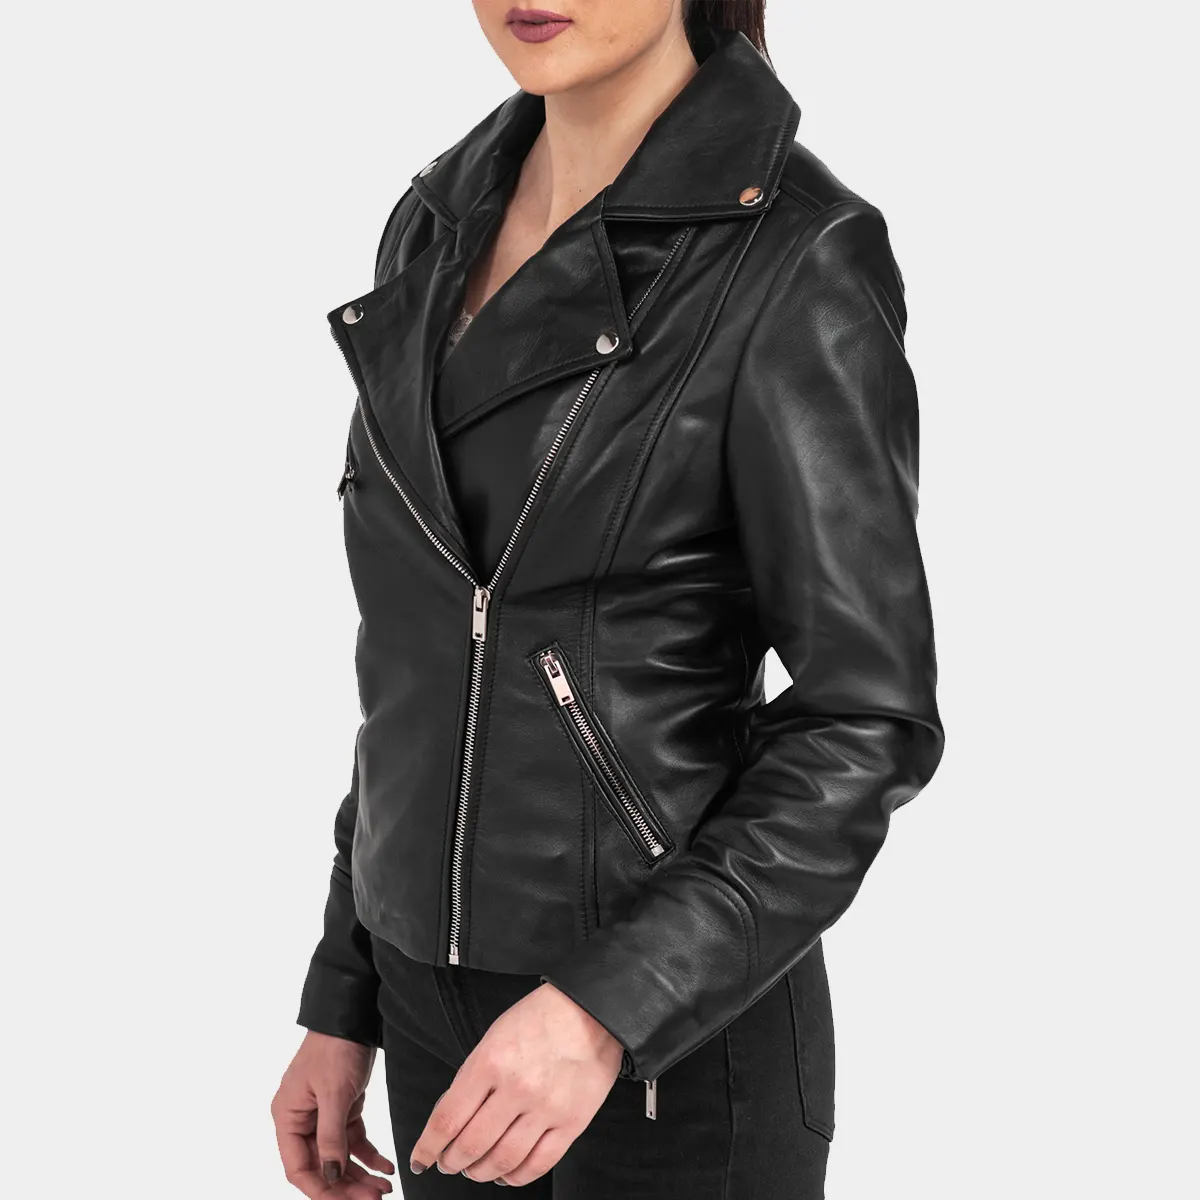 Slim fit leather jacket for women